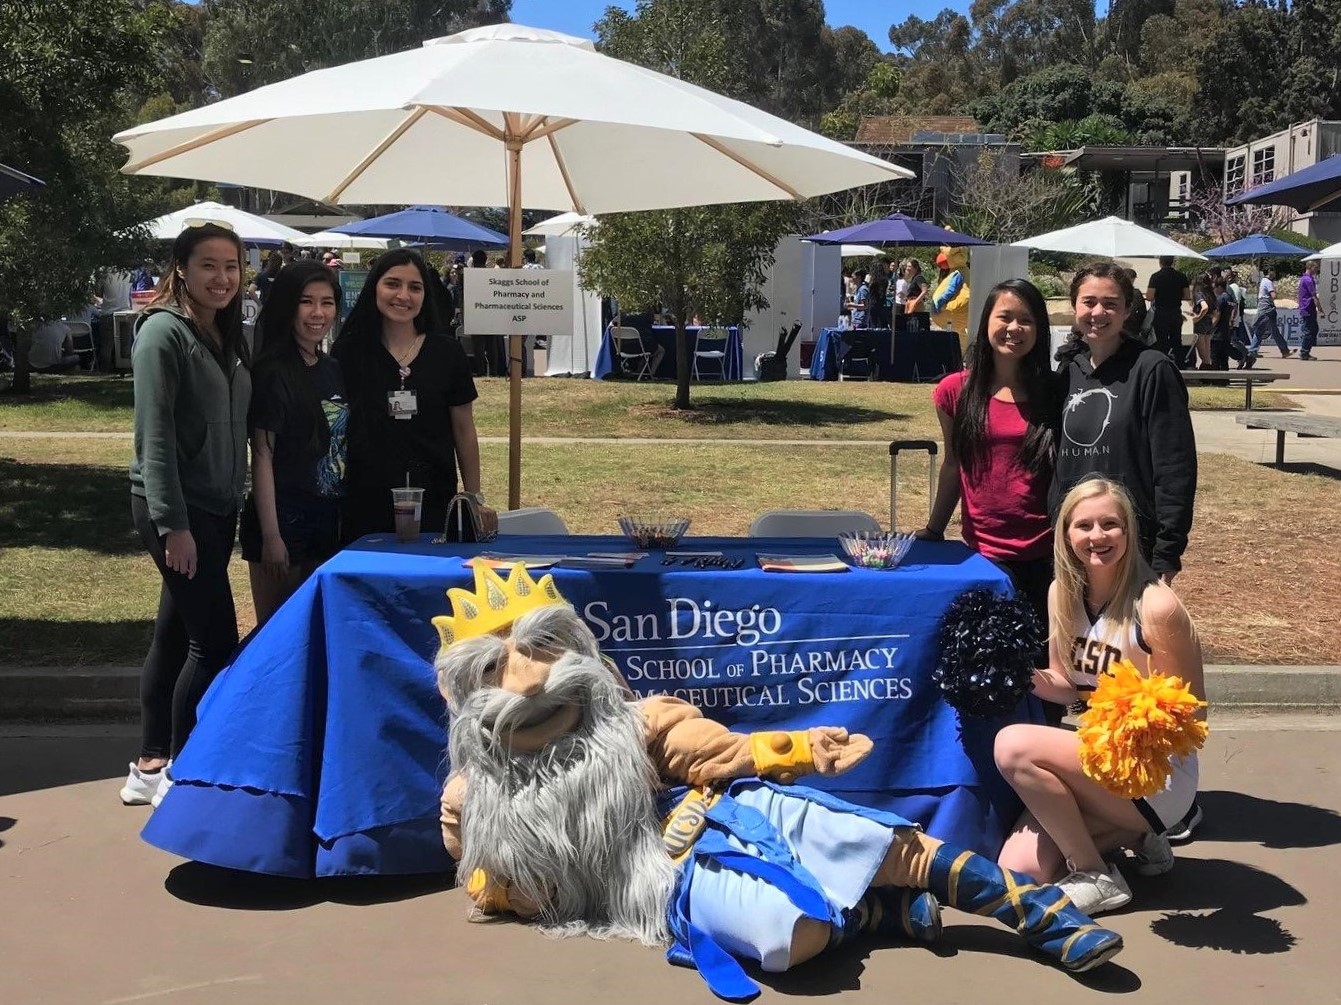 Skaggs students participating in the Welcome Triton event at UC San Diego